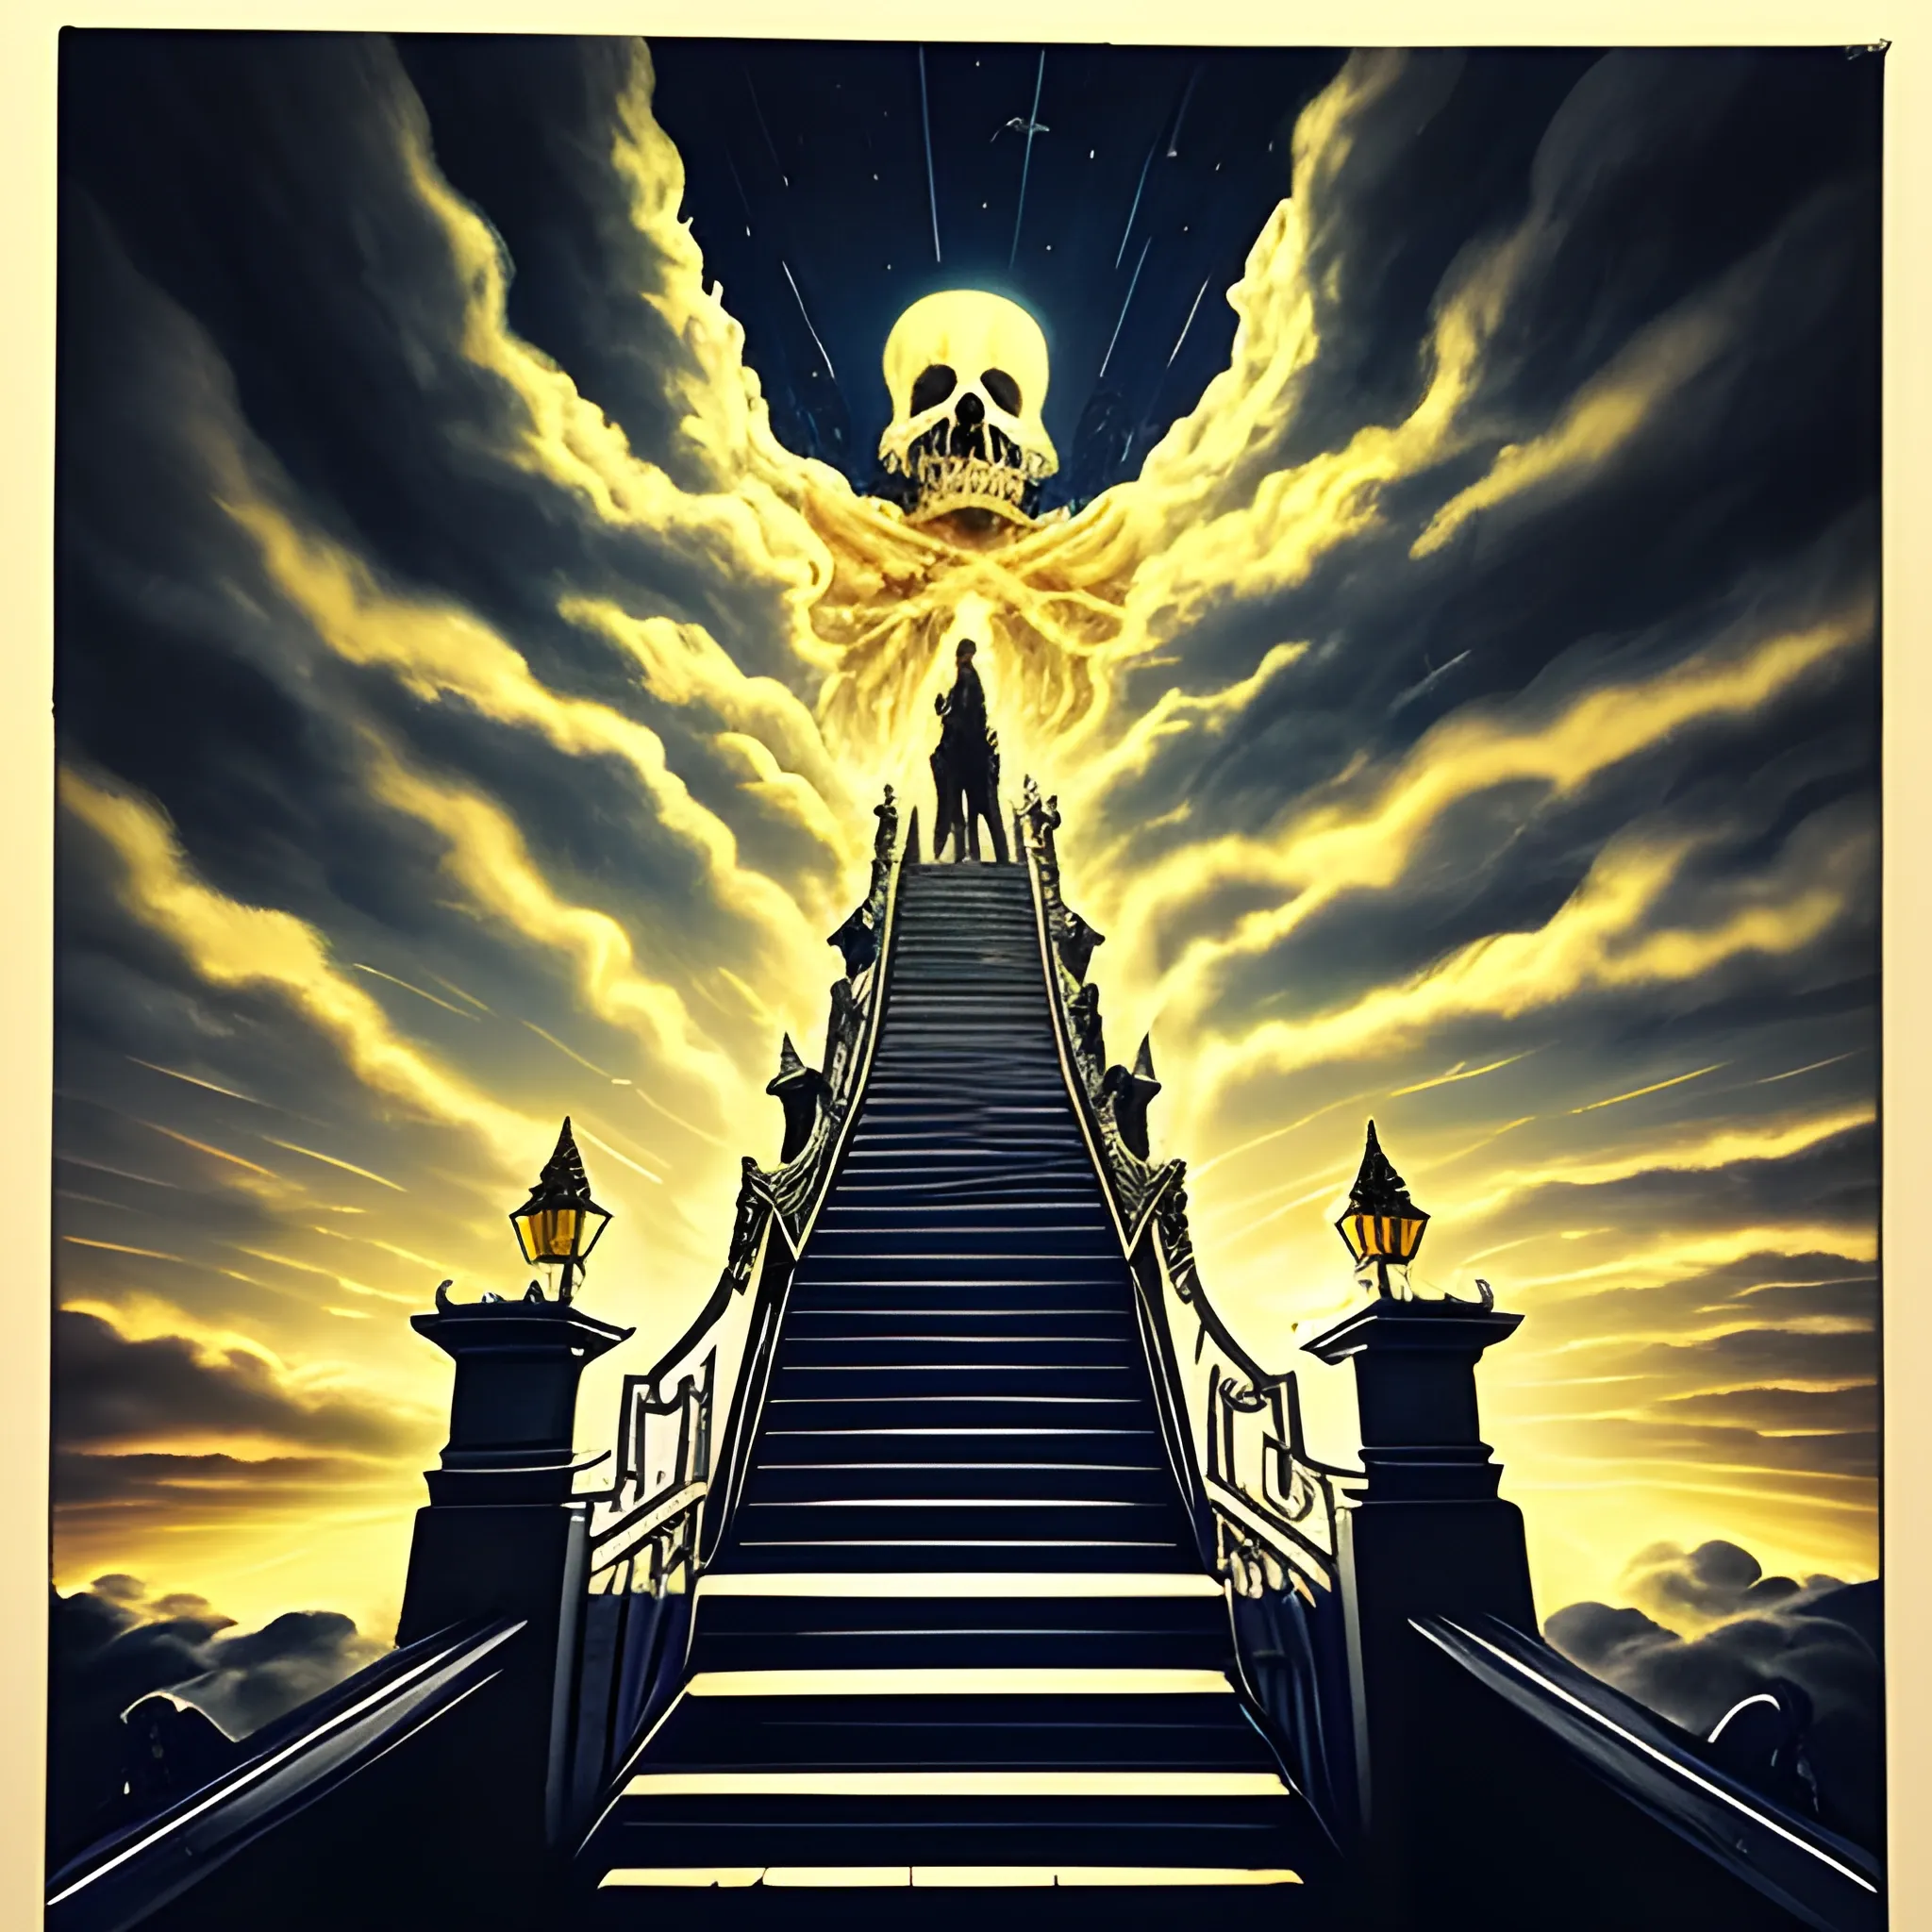 death climbing the stairs with his back to the gates of heaven. The sky is seen above with many clouds and with a flash of light, and the golden gates.
